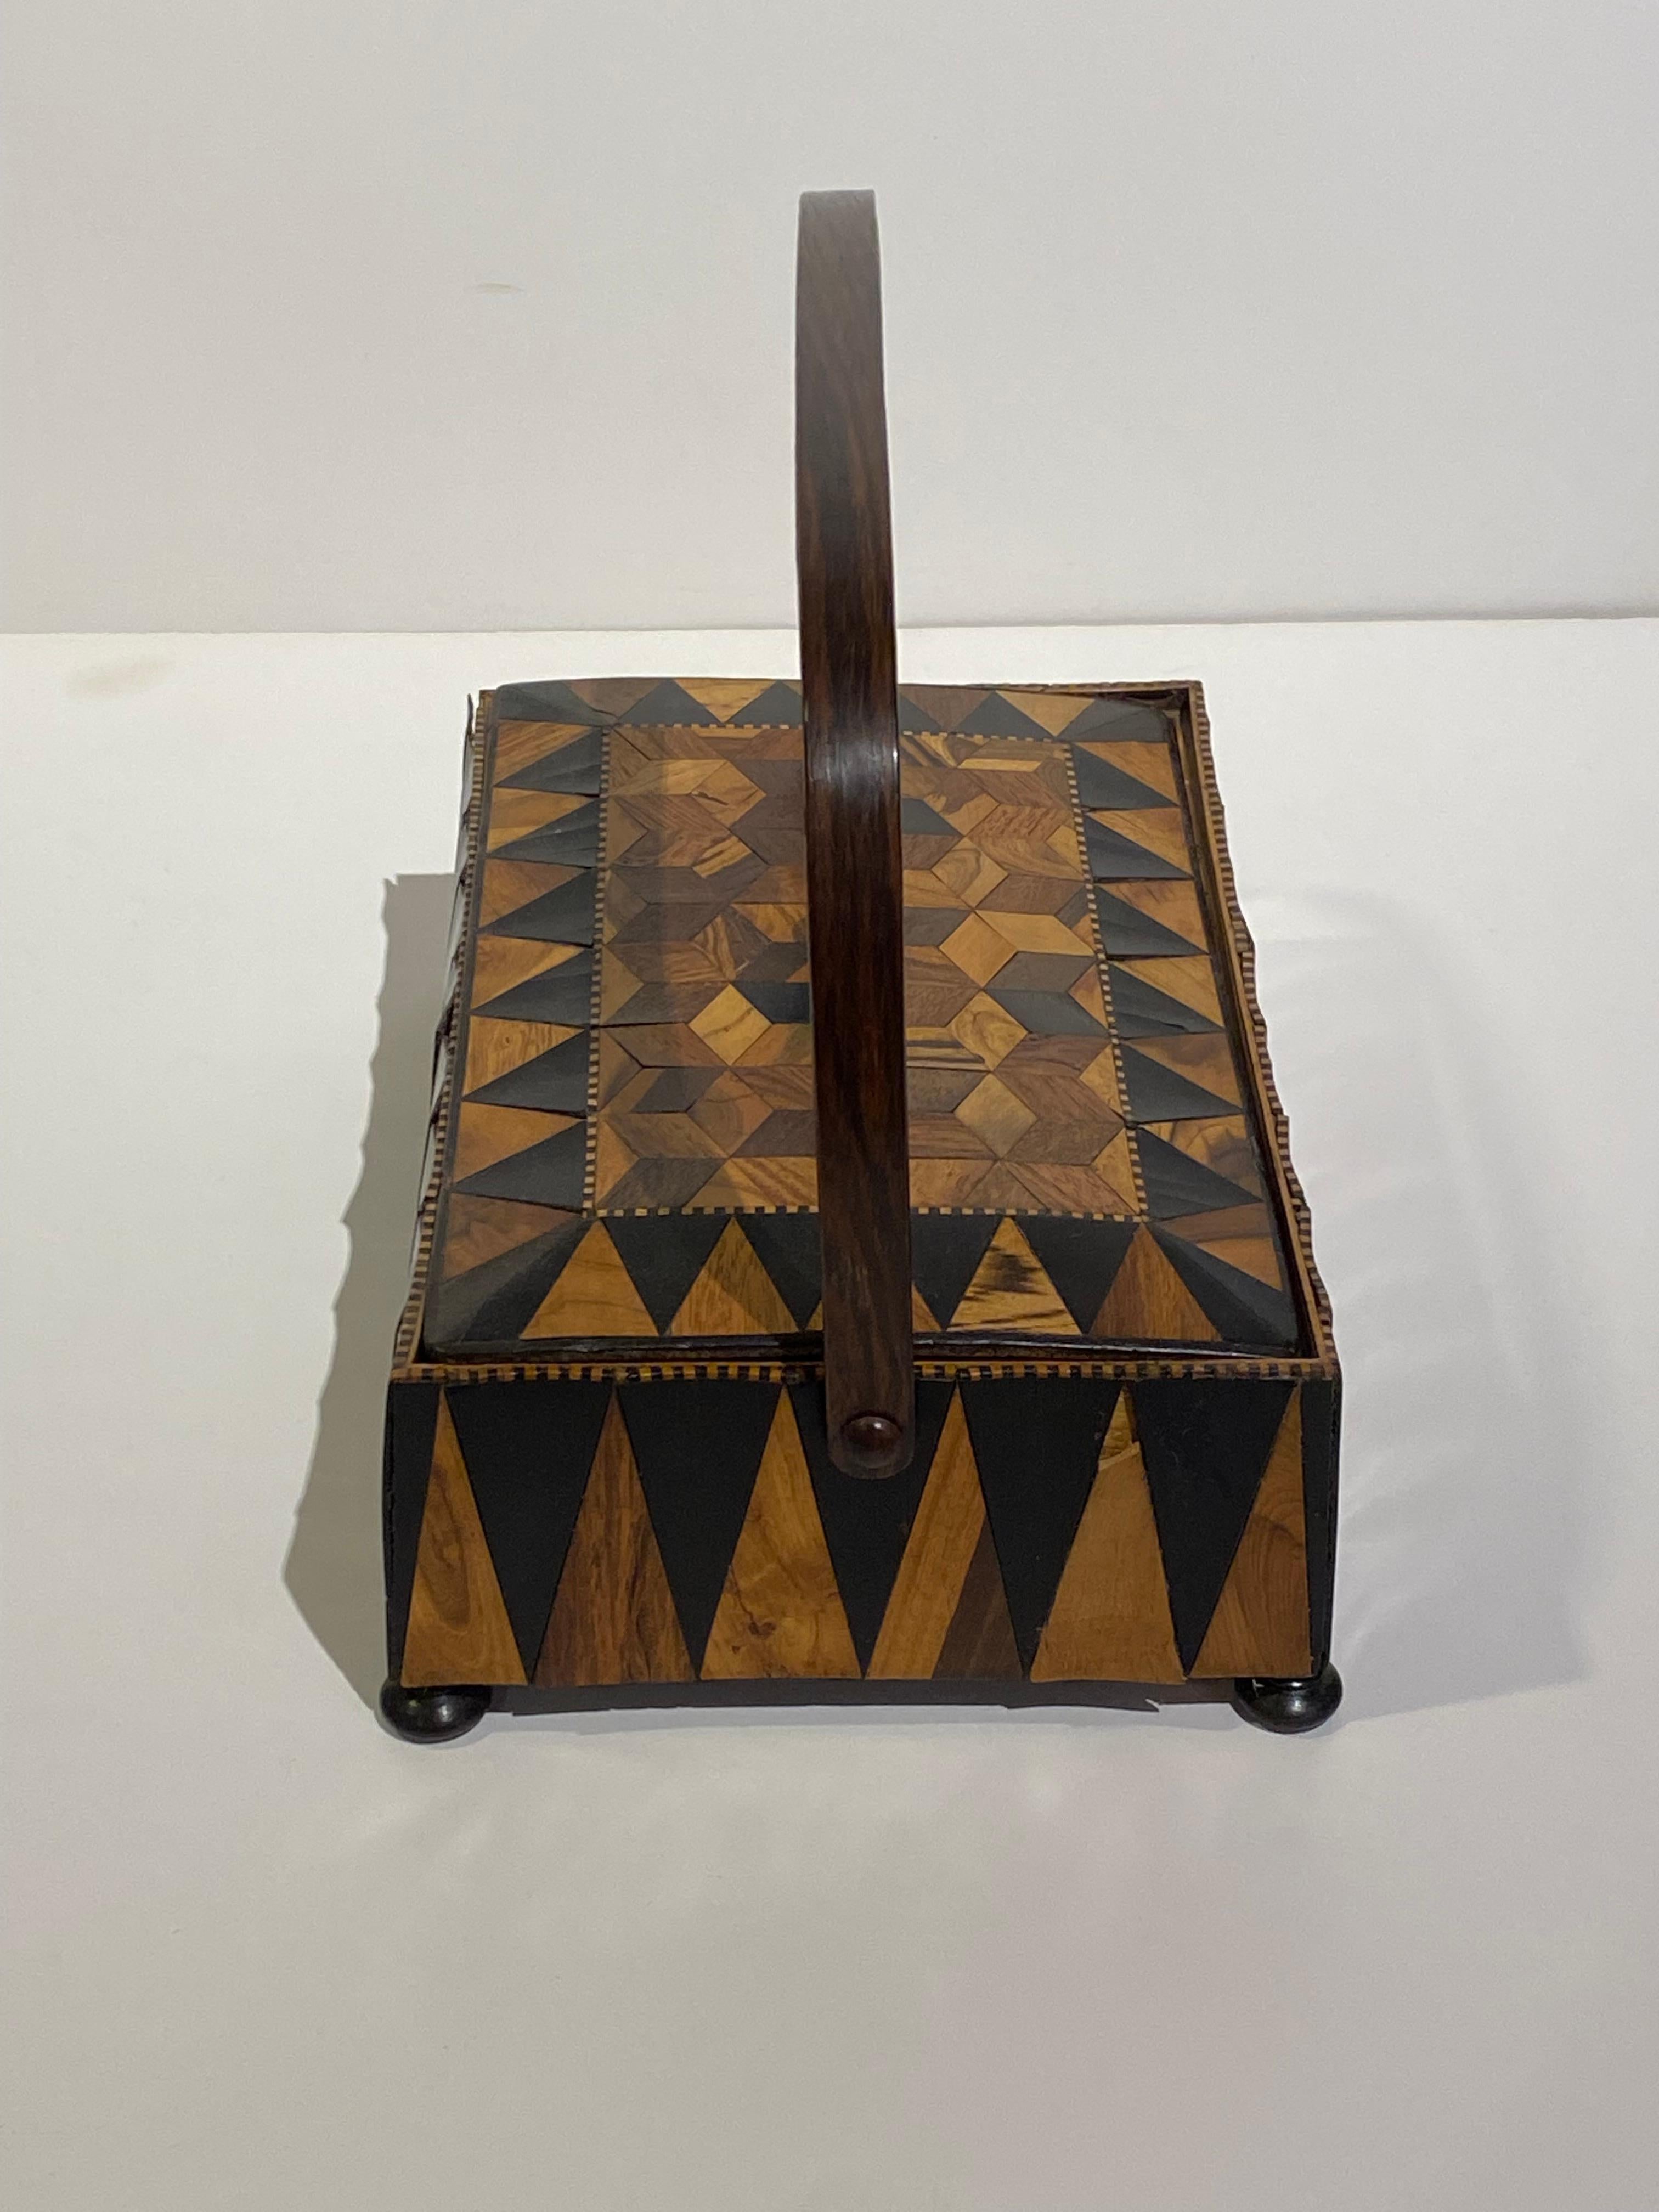 Highly Decorative Rectangular 19th Century Walnut Trunbridge Parquetry Box with Handle and Bun Feet From England. 9